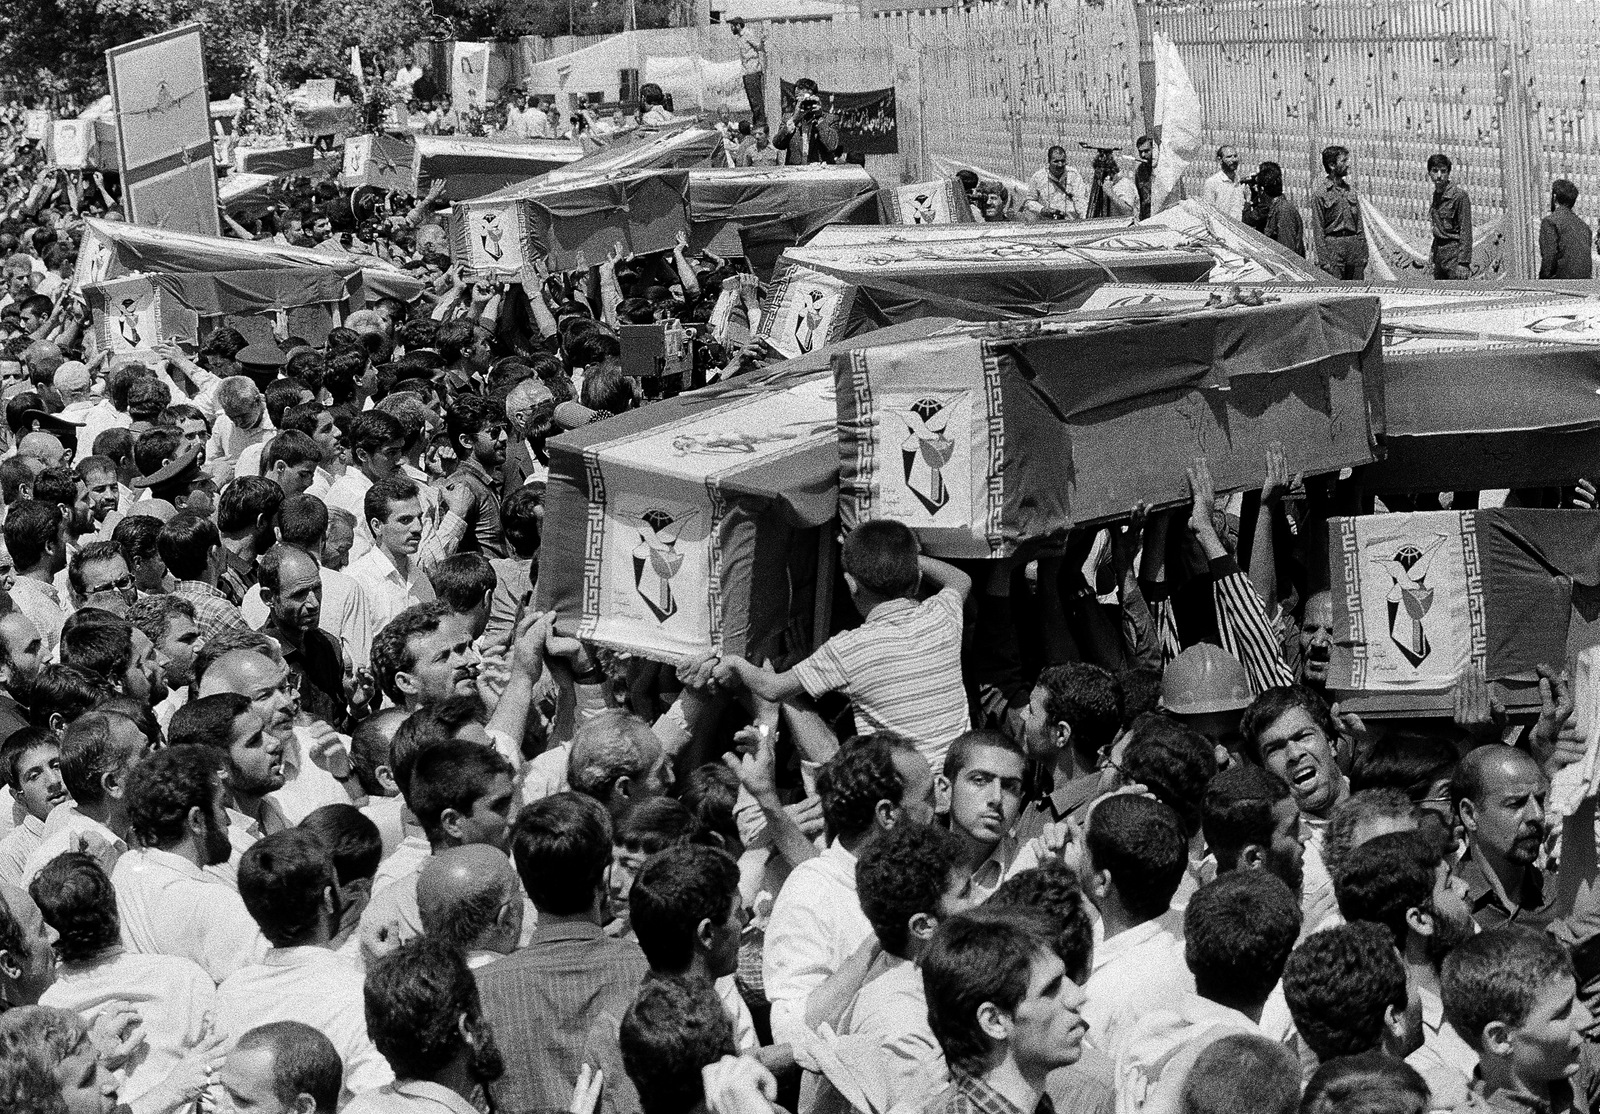 Mourners carry coffins through the streets of Tehran during a mass funeral for the victims aboard Iran Air Flight 655, which was shot down by the USS Vincennes in the Persian Gulf, July 7, 1988. Iran claims the shooting down of a passenger plane was act of cold blooded murder, the U.S. claims it was accidental. (AP Photo)